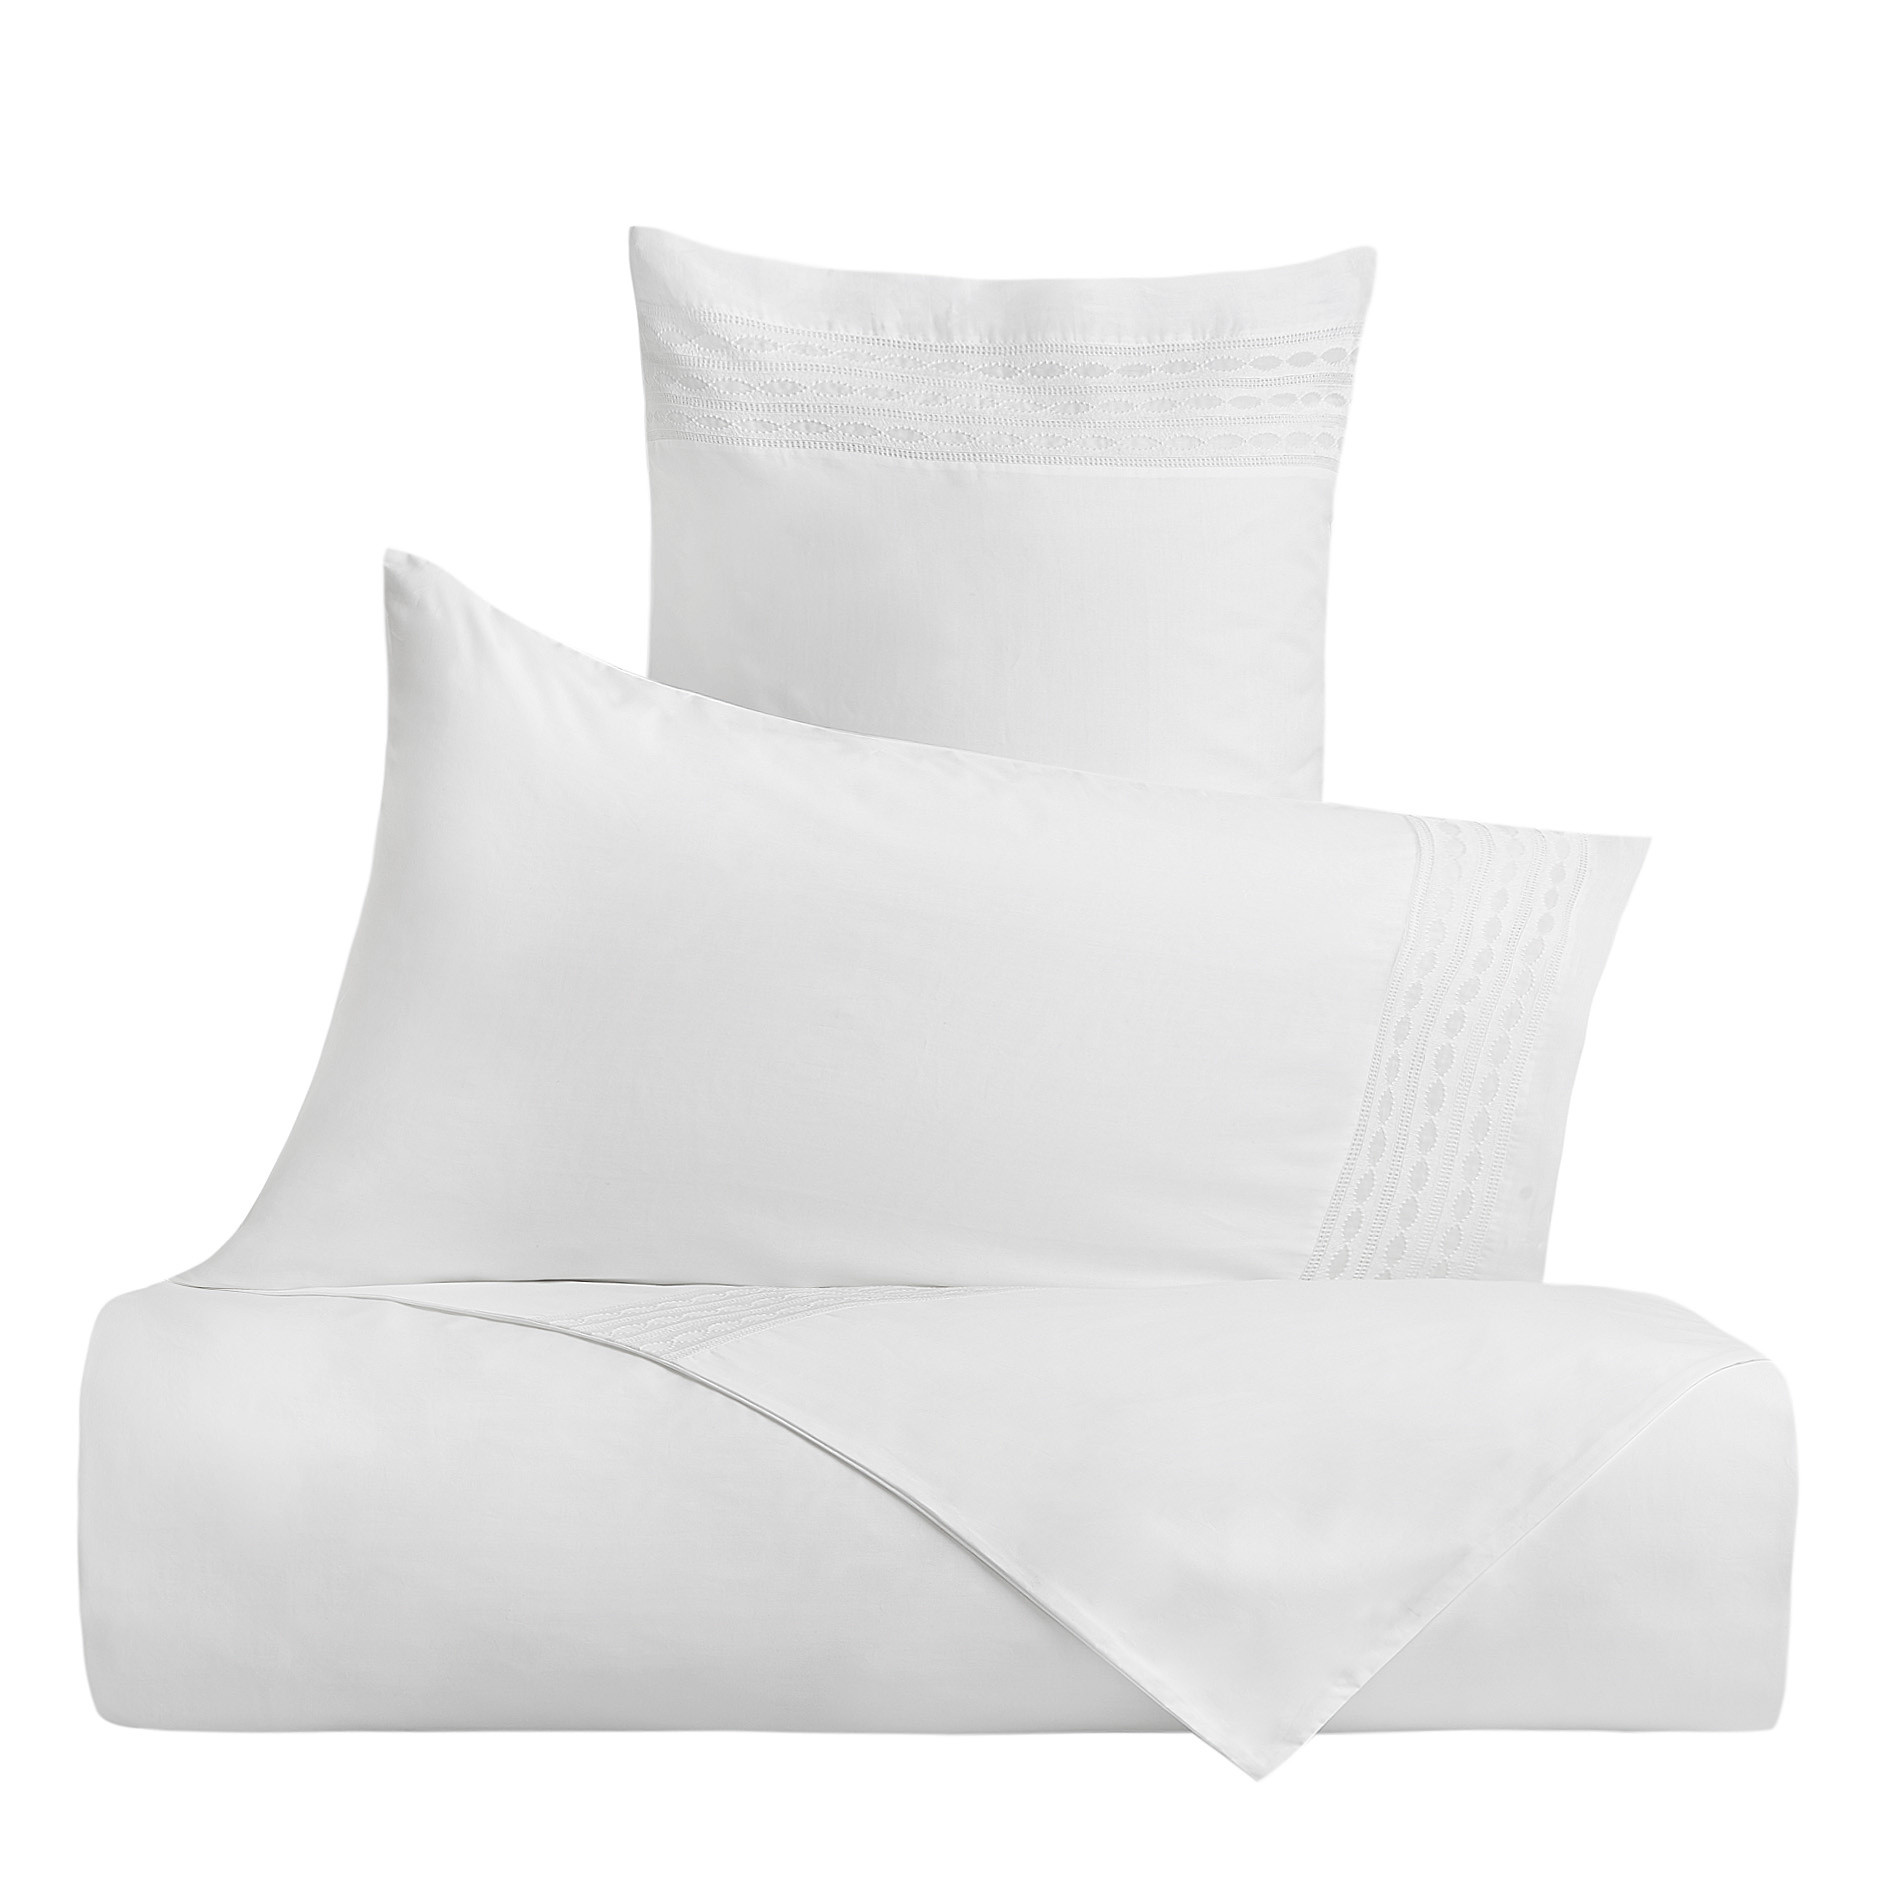 Portofino pillowcase in 100% cotton with embroidered trim, White, large image number 1